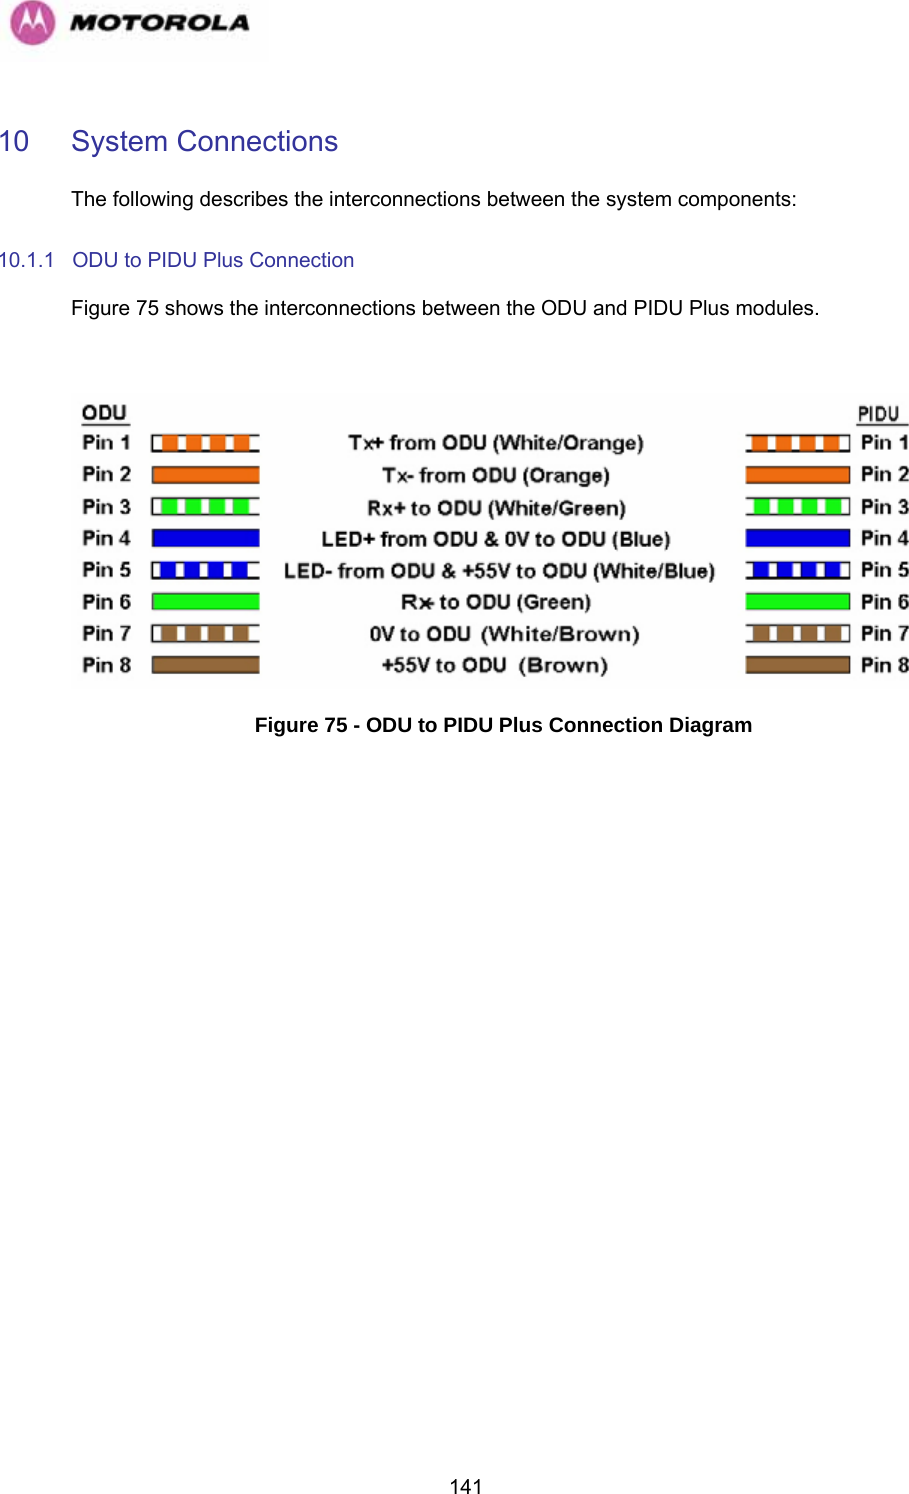   14110 System Connections  The following describes the interconnections between the system components: 10.1.1  ODU to PIDU Plus Connection Figure 75 shows the interconnections between the ODU and PIDU Plus modules.   Figure 75 - ODU to PIDU Plus Connection Diagram 